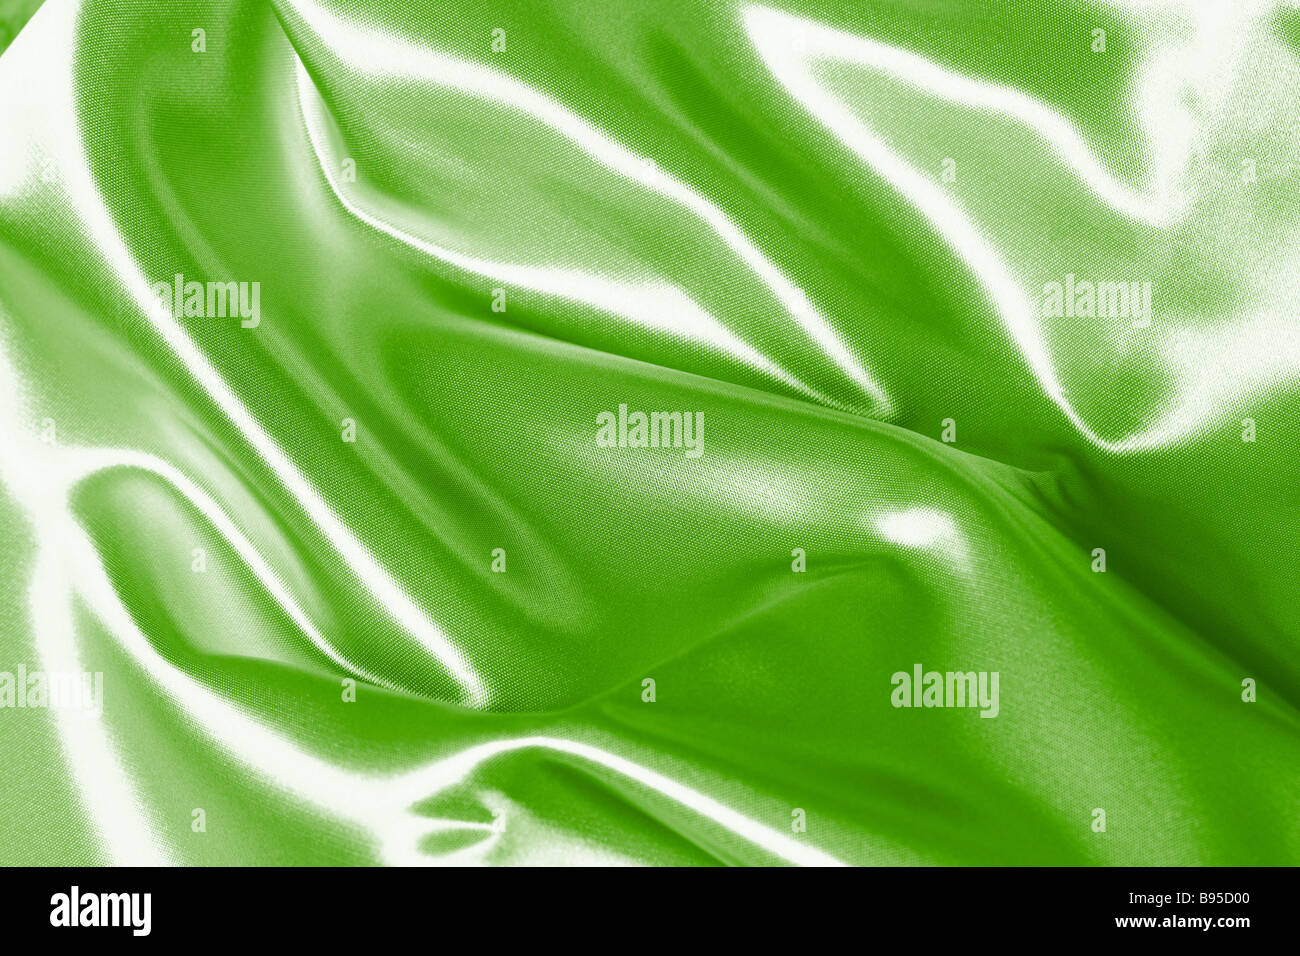 Background of a Green blanket Stock Photo